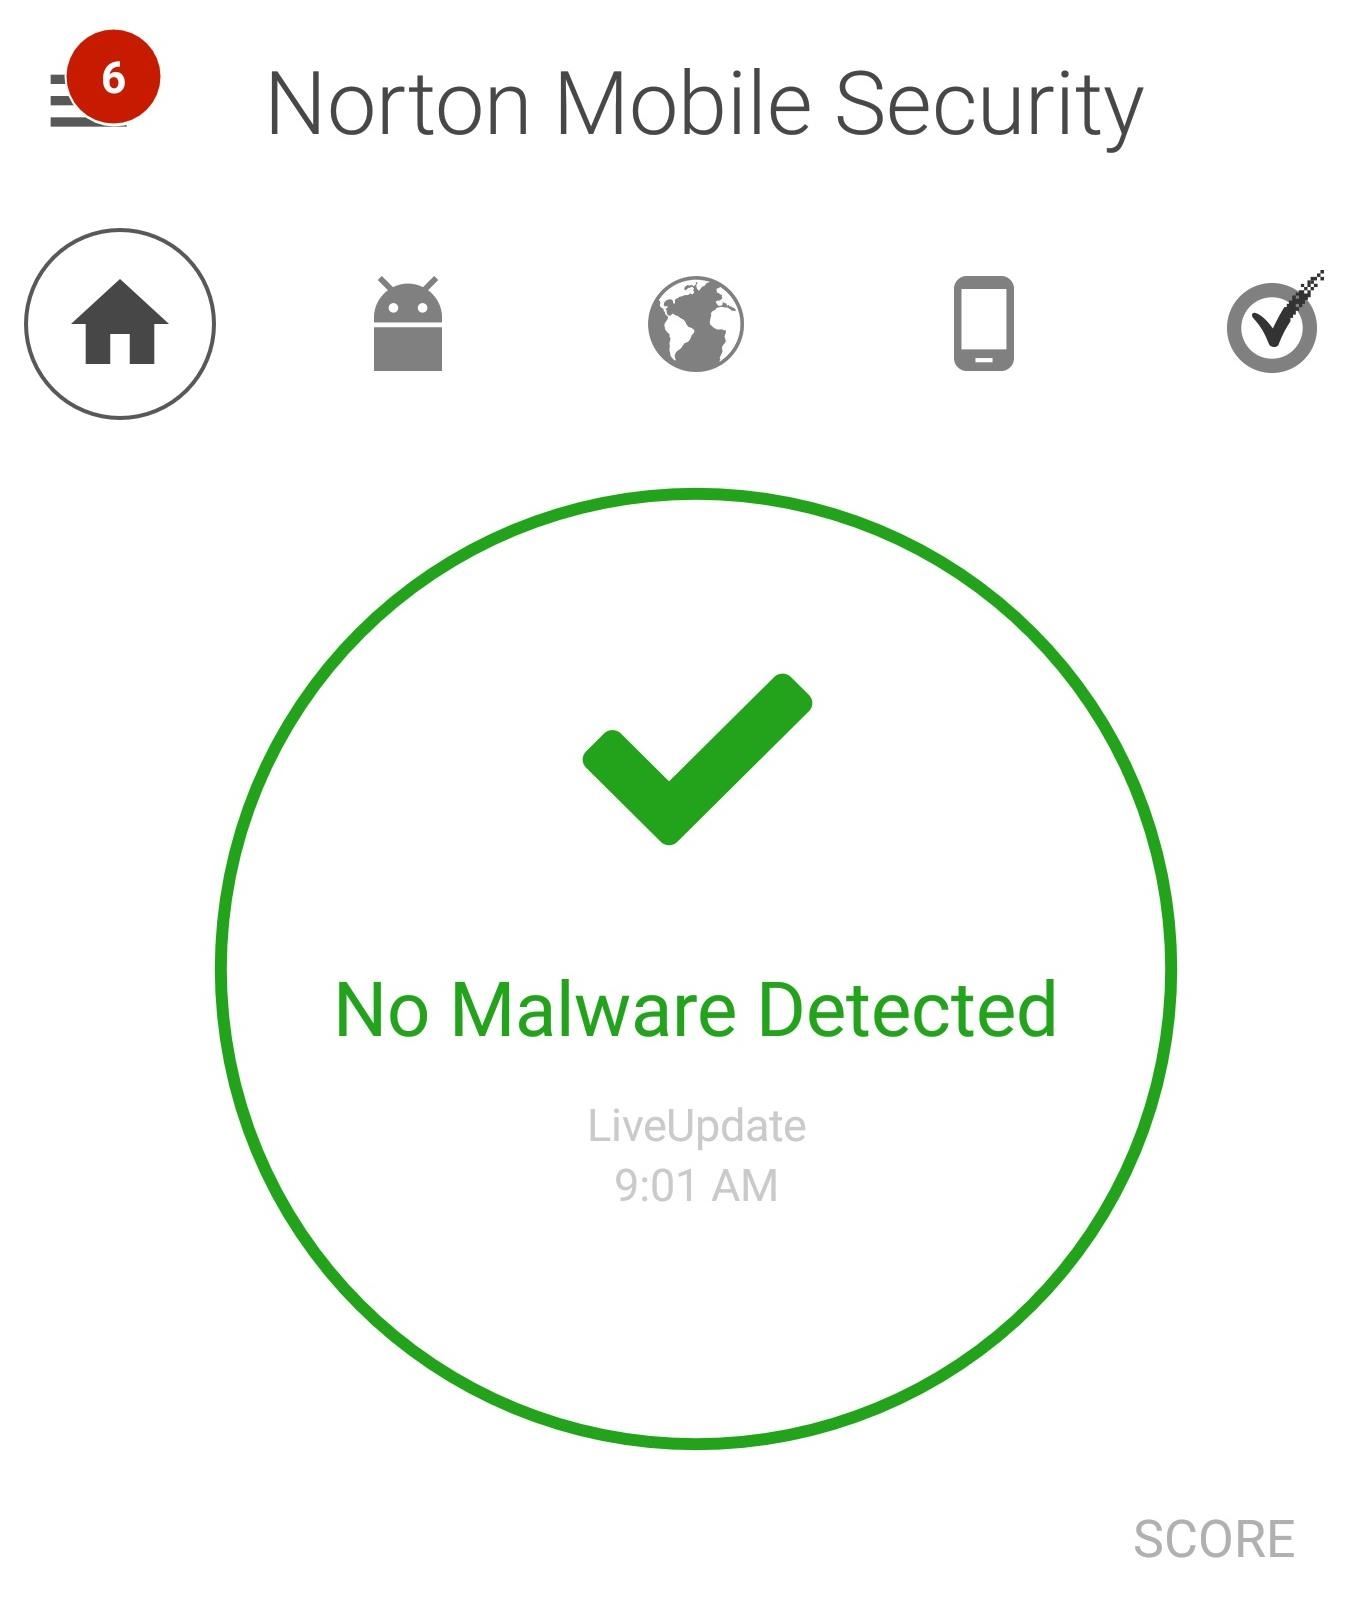 5 Reasons You Should Use Be Using Norton Mobile Security on Your Android Device